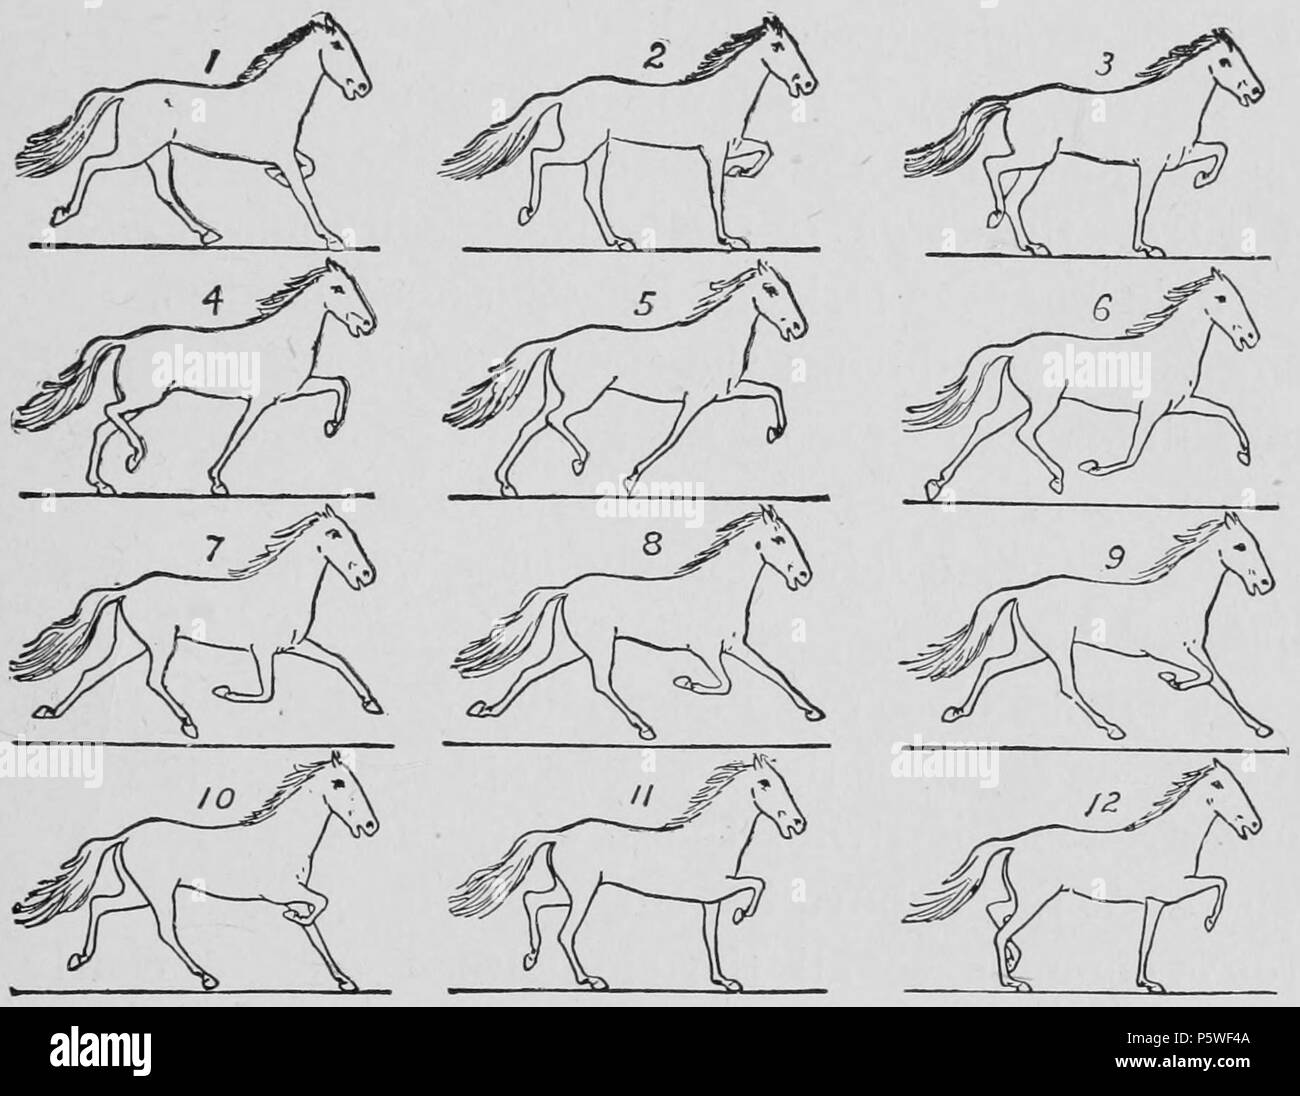 N/A. English: Some consecutive phases of the Trot. 1893.   Eadweard Muybridge  (1830–1904)      Alternative names Edward James Muggeridge  Description English-American photographer and inventor  Date of birth/death 9 April 1830 8 May 1904  Location of birth/death Kingston upon Thames, England Kingston upon Thames, England  Authority control  : Q190568 VIAF:2538199 ISNI:0000 0001 2117 9845 ULAN:500115207 LCCN:n79075151 NARA:10582473 WorldCat 438 Descriptive Zoopraxography 051 Stock Photo